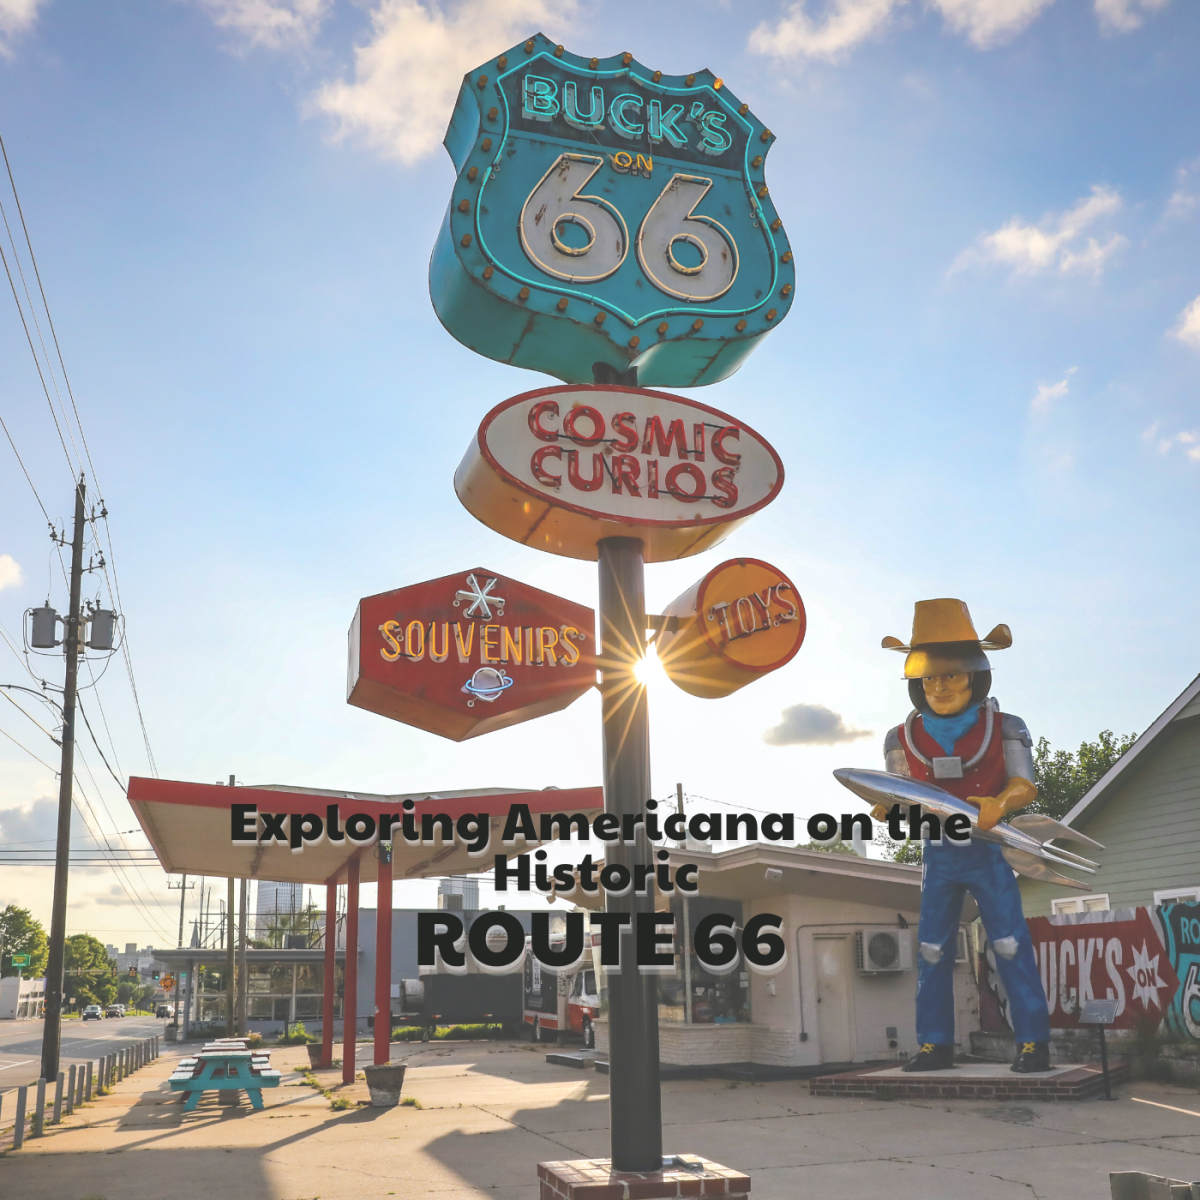 All along the historic Route 66 are sights that reveal an America of days gone by. 